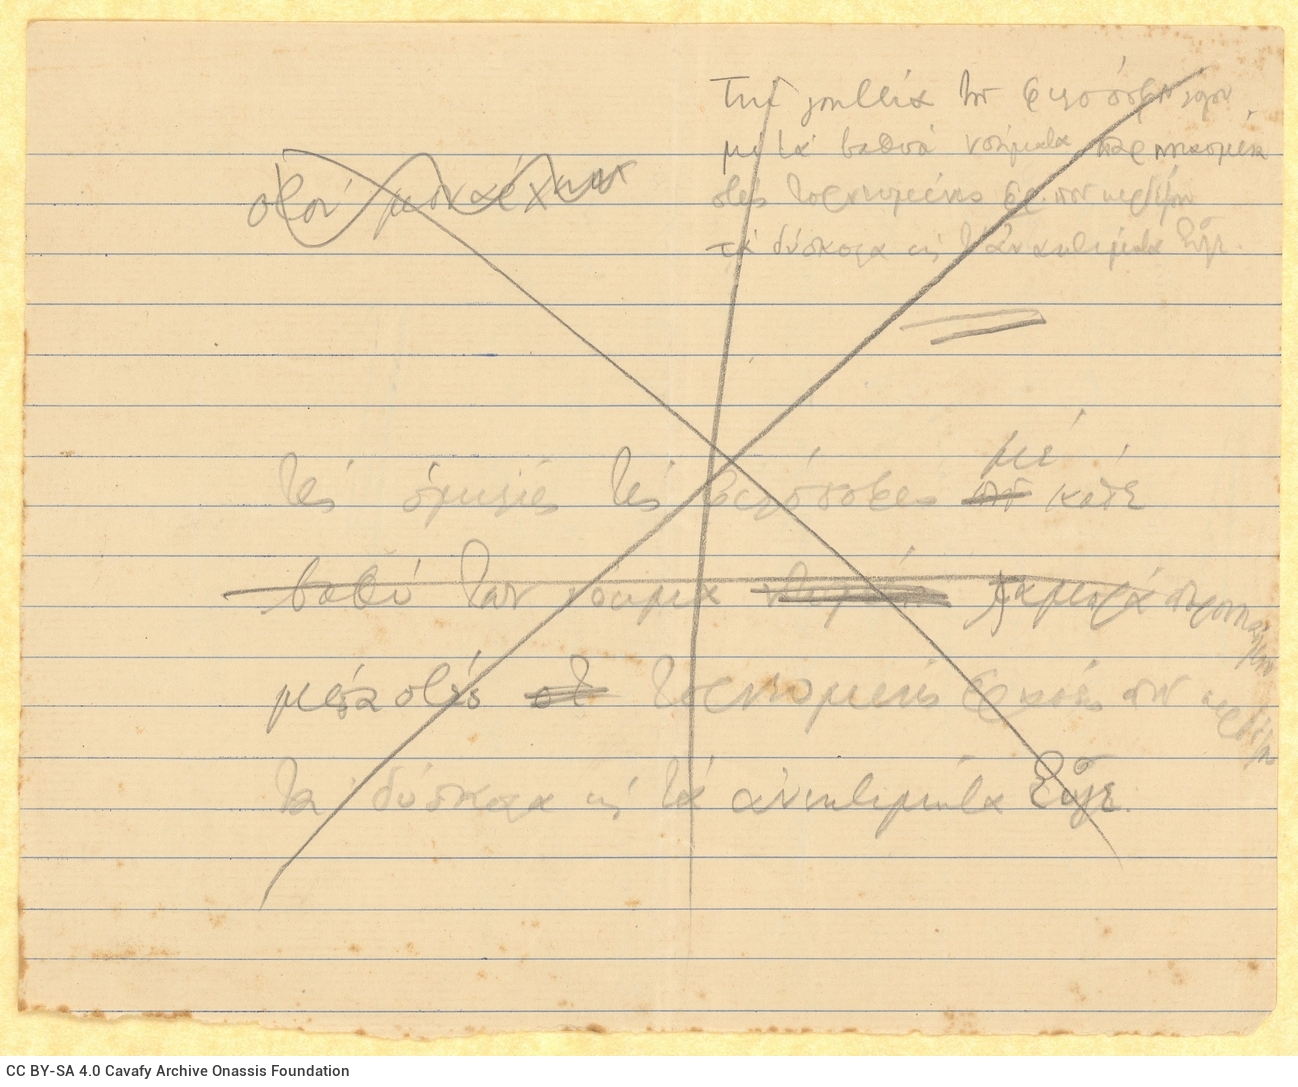 Handwritten notes on the poem "The Satrapy" on both sides of a ruled paper. The notes on the verso have been crossed out.